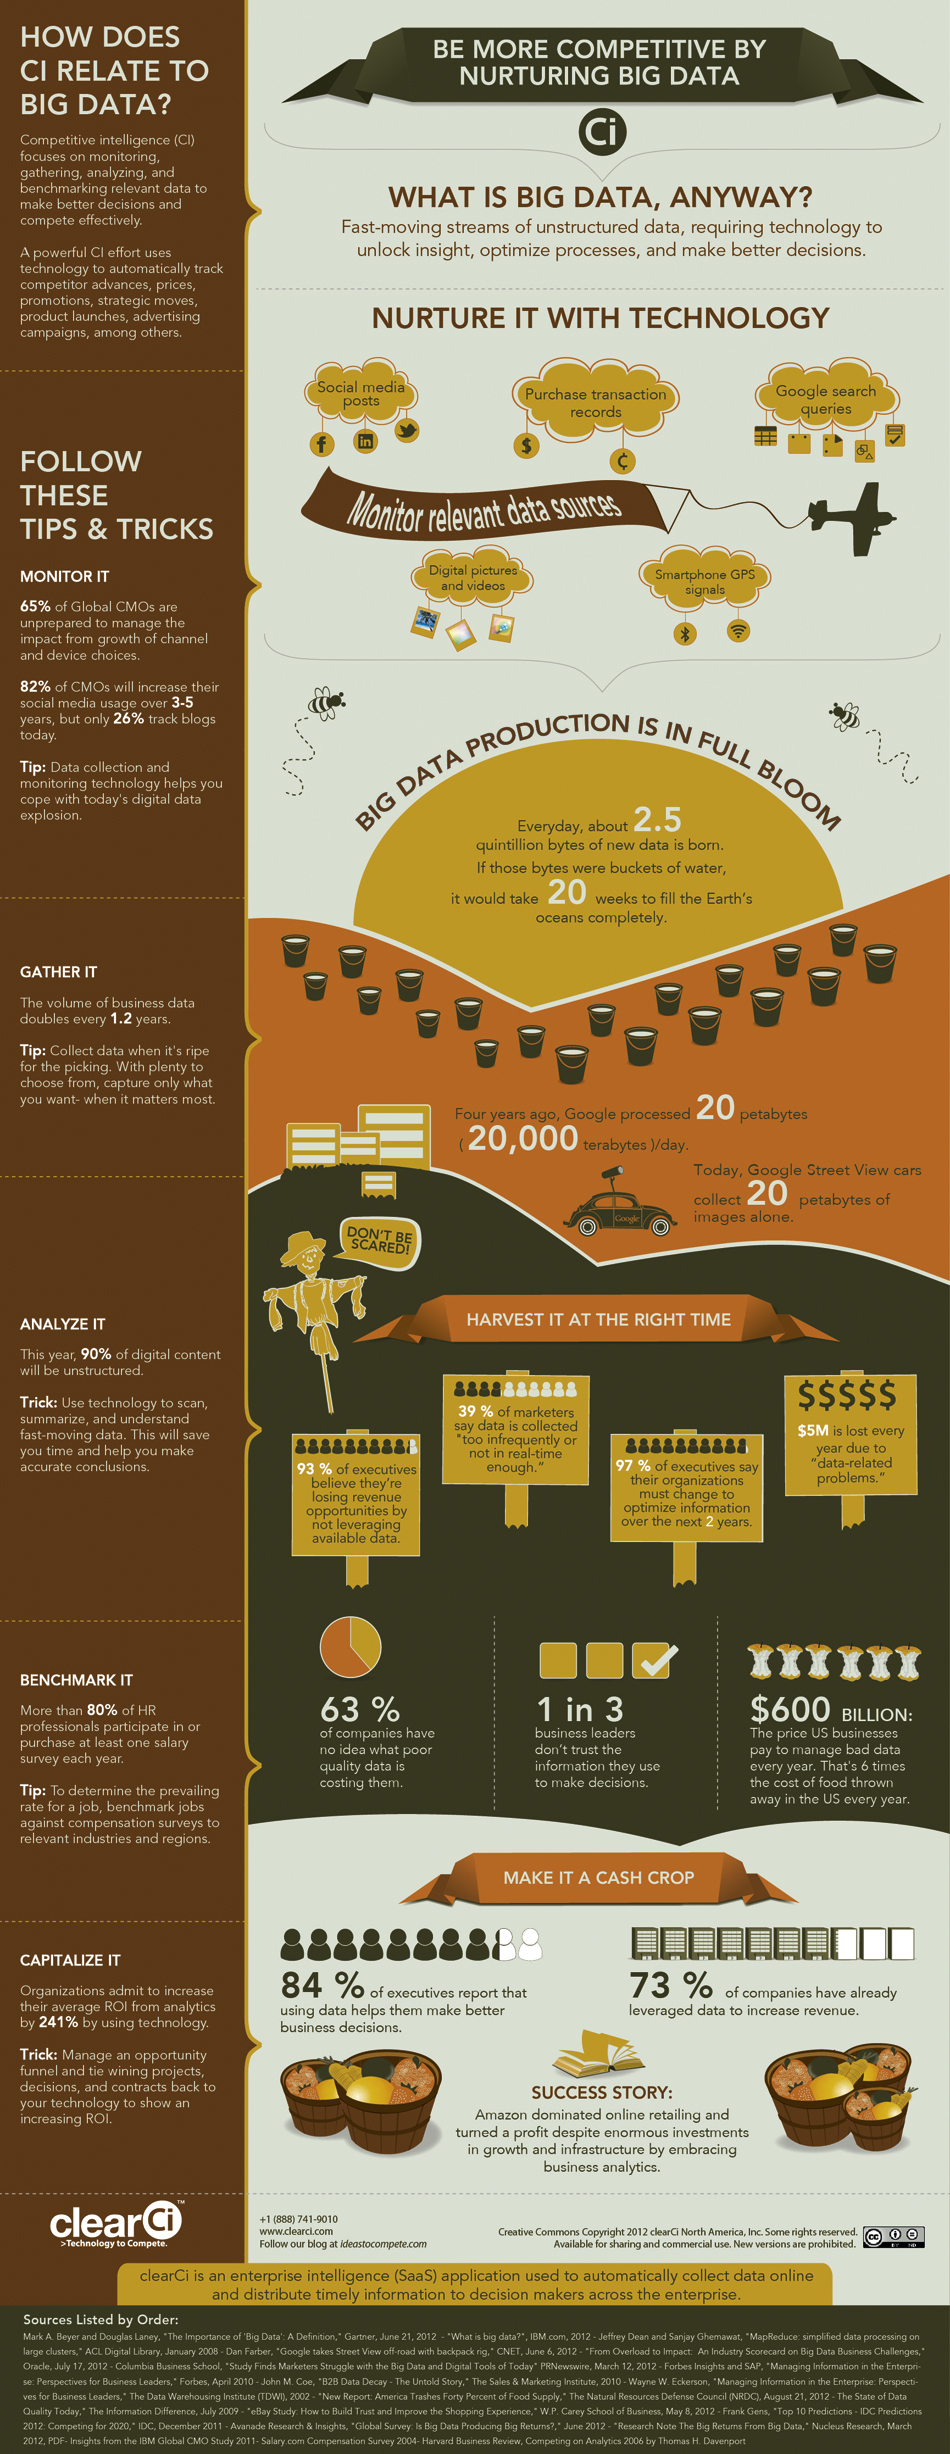 How To Become More Competitive With Big Data - Infograhic